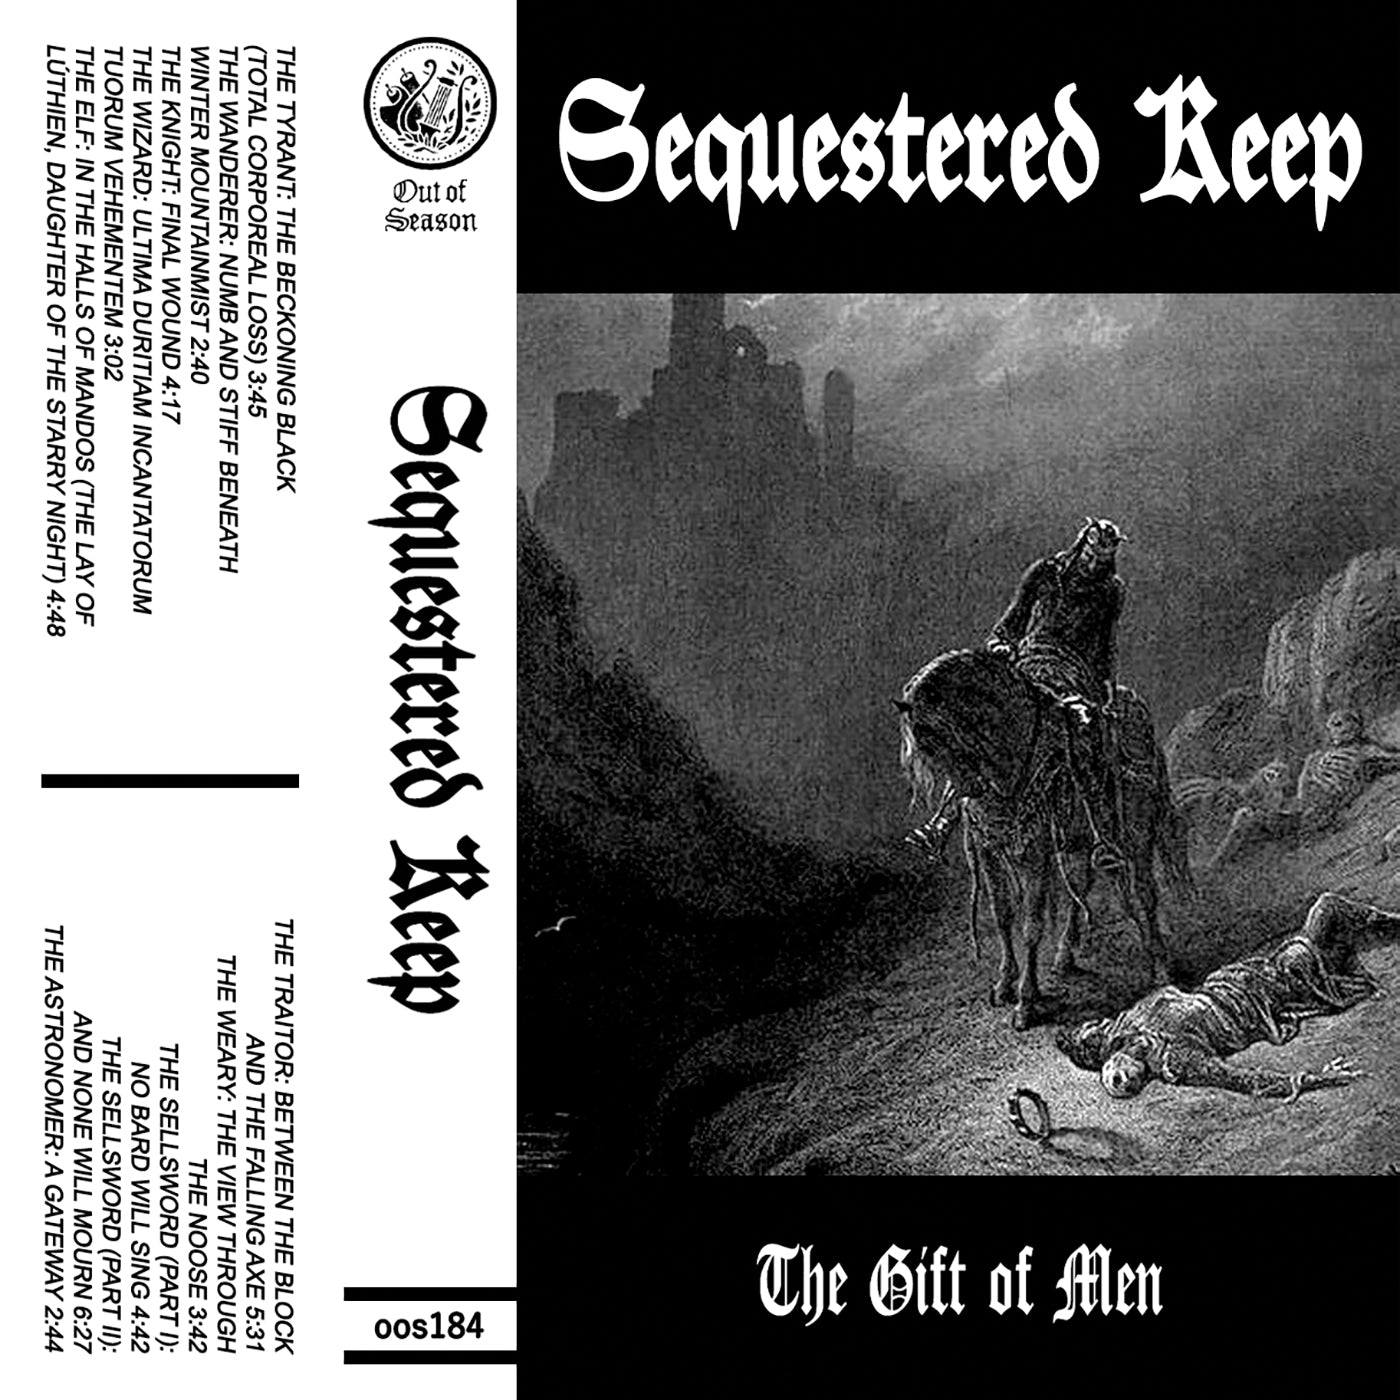 [SOLD OUT] SEQUESTERED KEEP "The Gift of Men" Cassette Tape (lim.50)